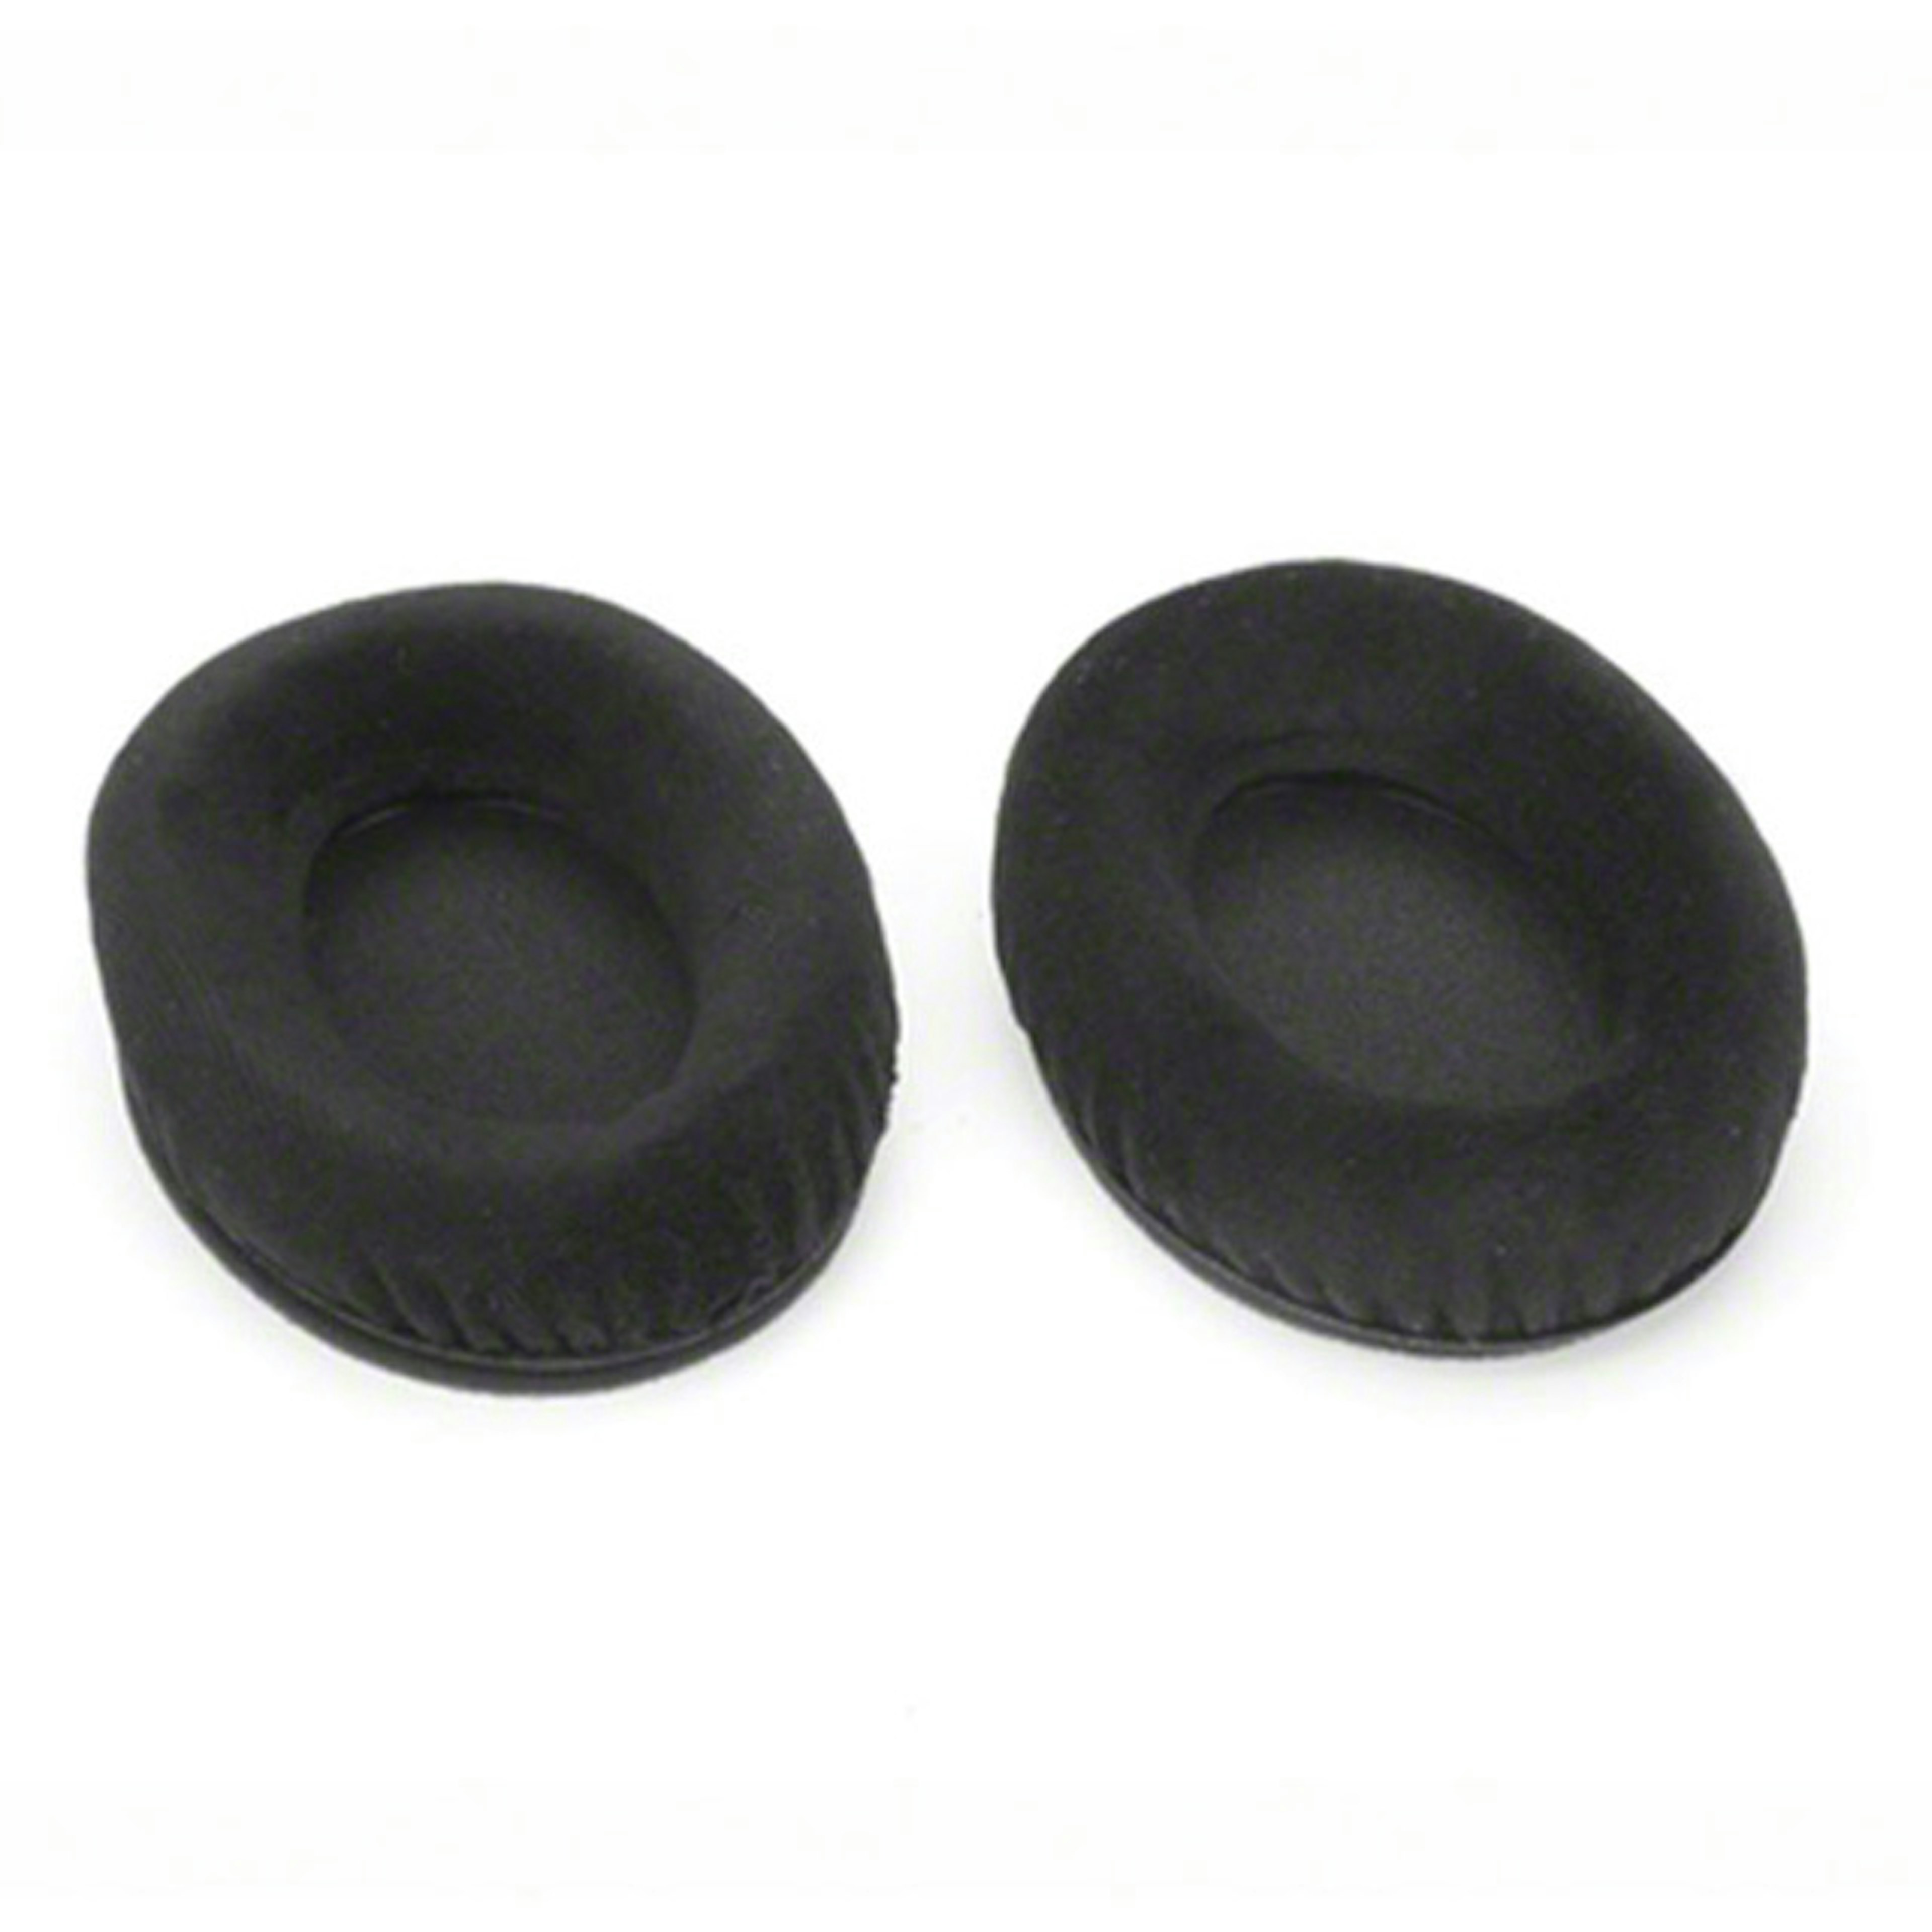 Earpads with foam disk, 1 pair